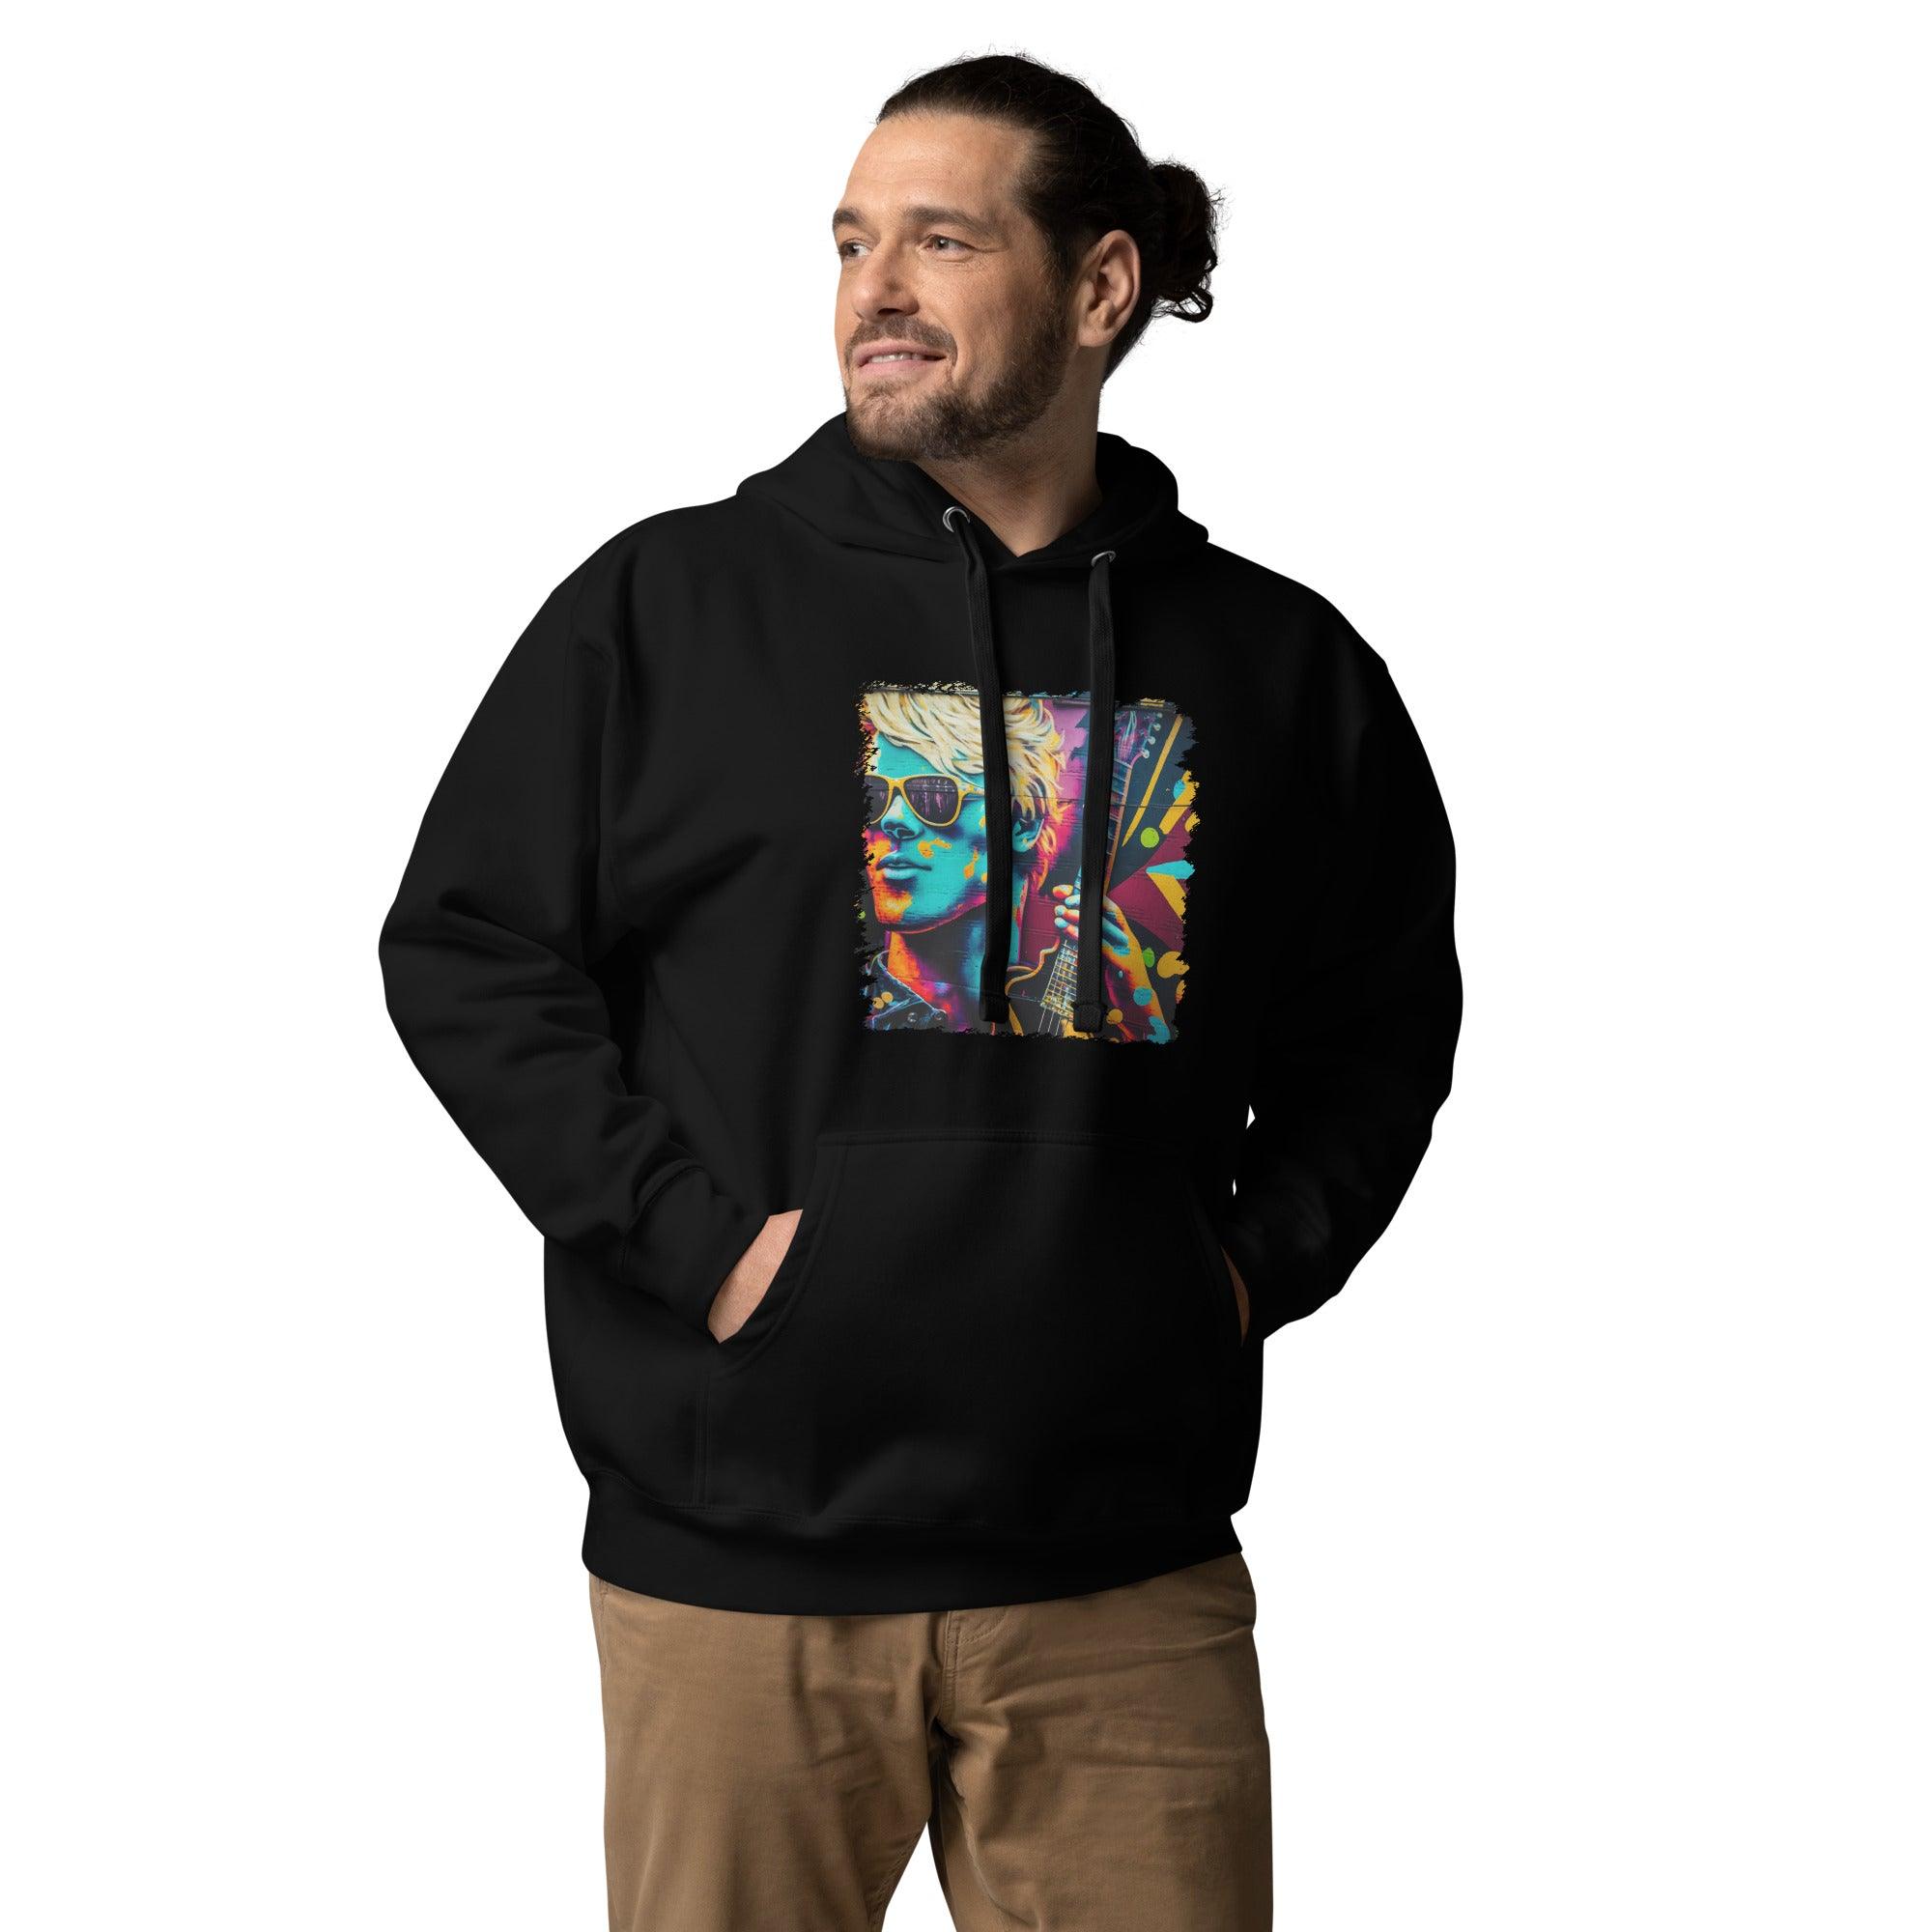 Making Music Come Alive Unisex Hoodie - Beyond T-shirts